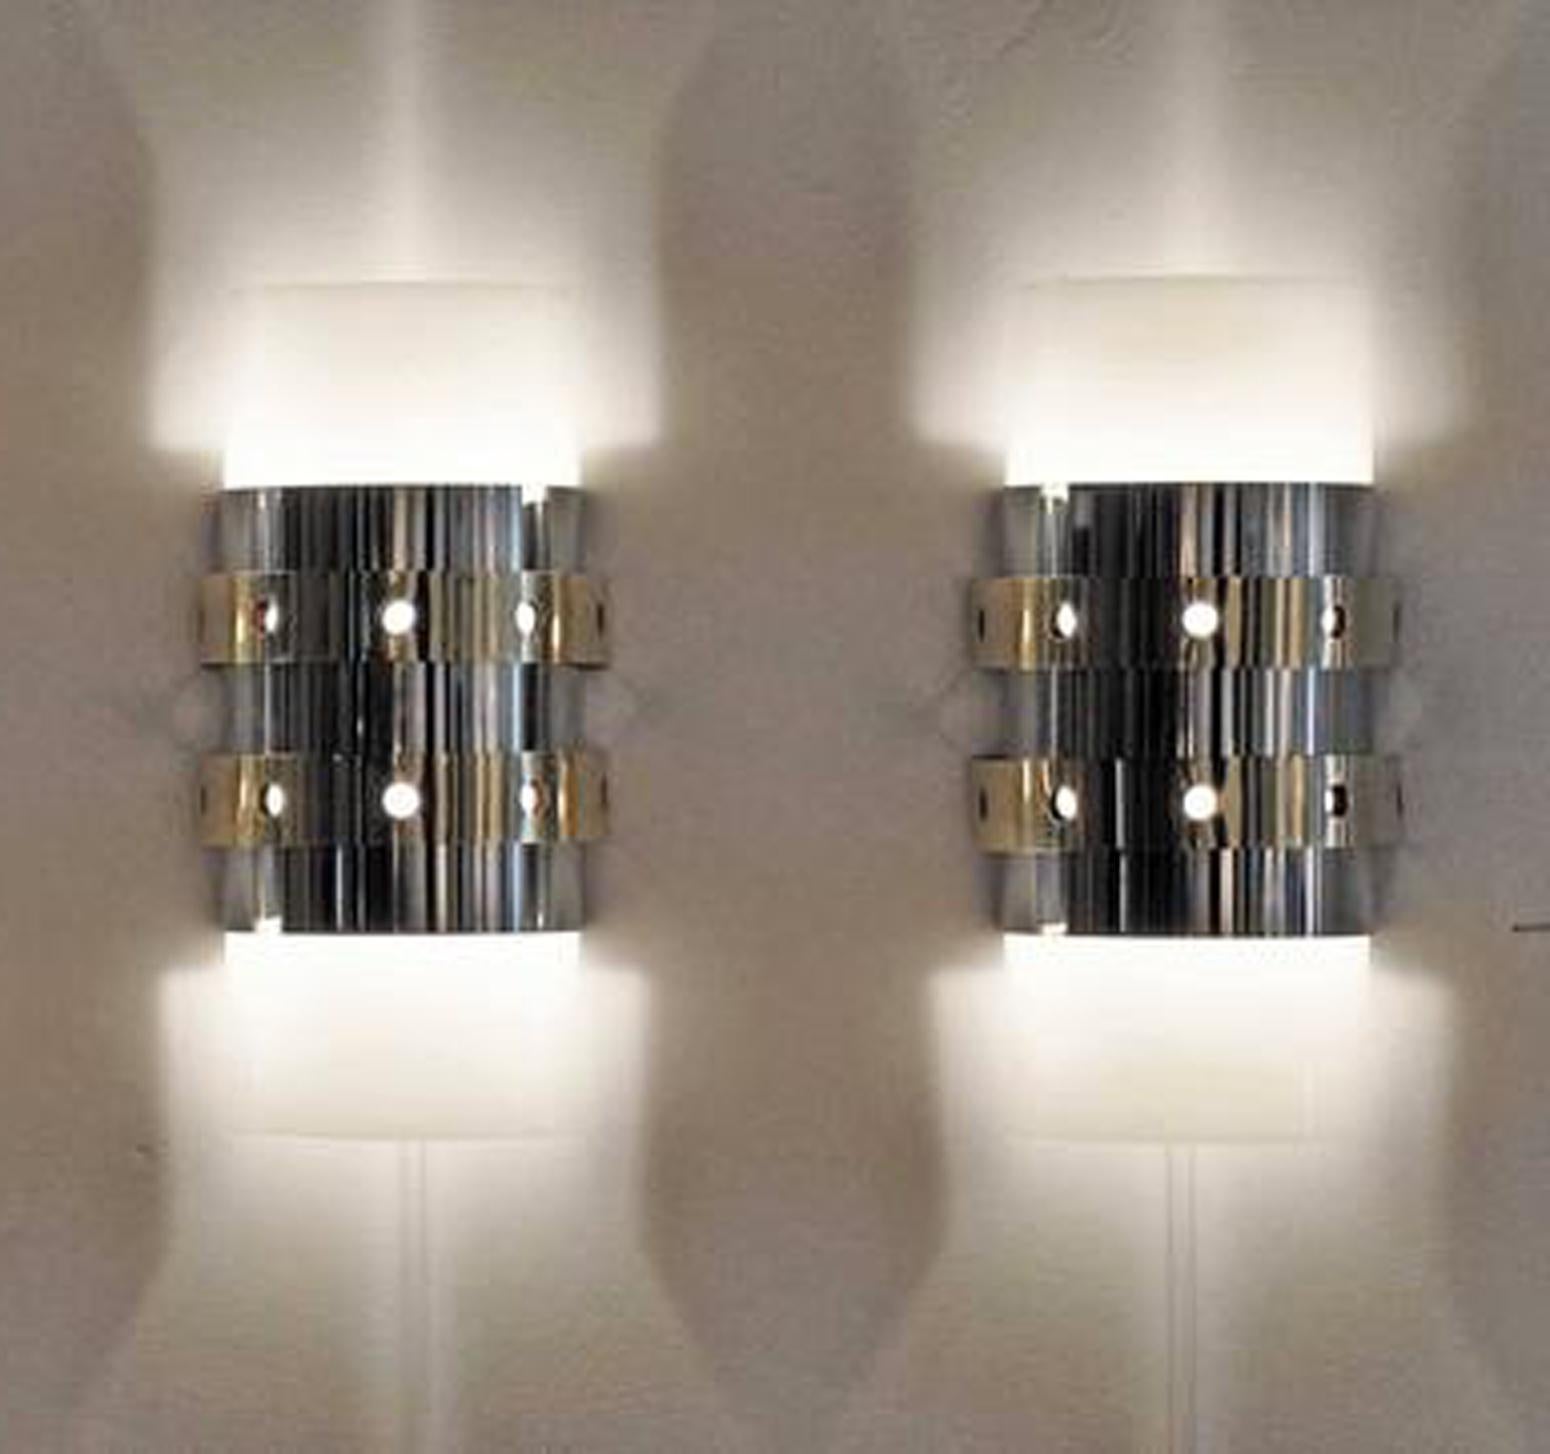 Pair of modernist, 1970s acrylic, polished chrome, and brass wall sconces.
Rewired and ready for use. Price is for the pair.